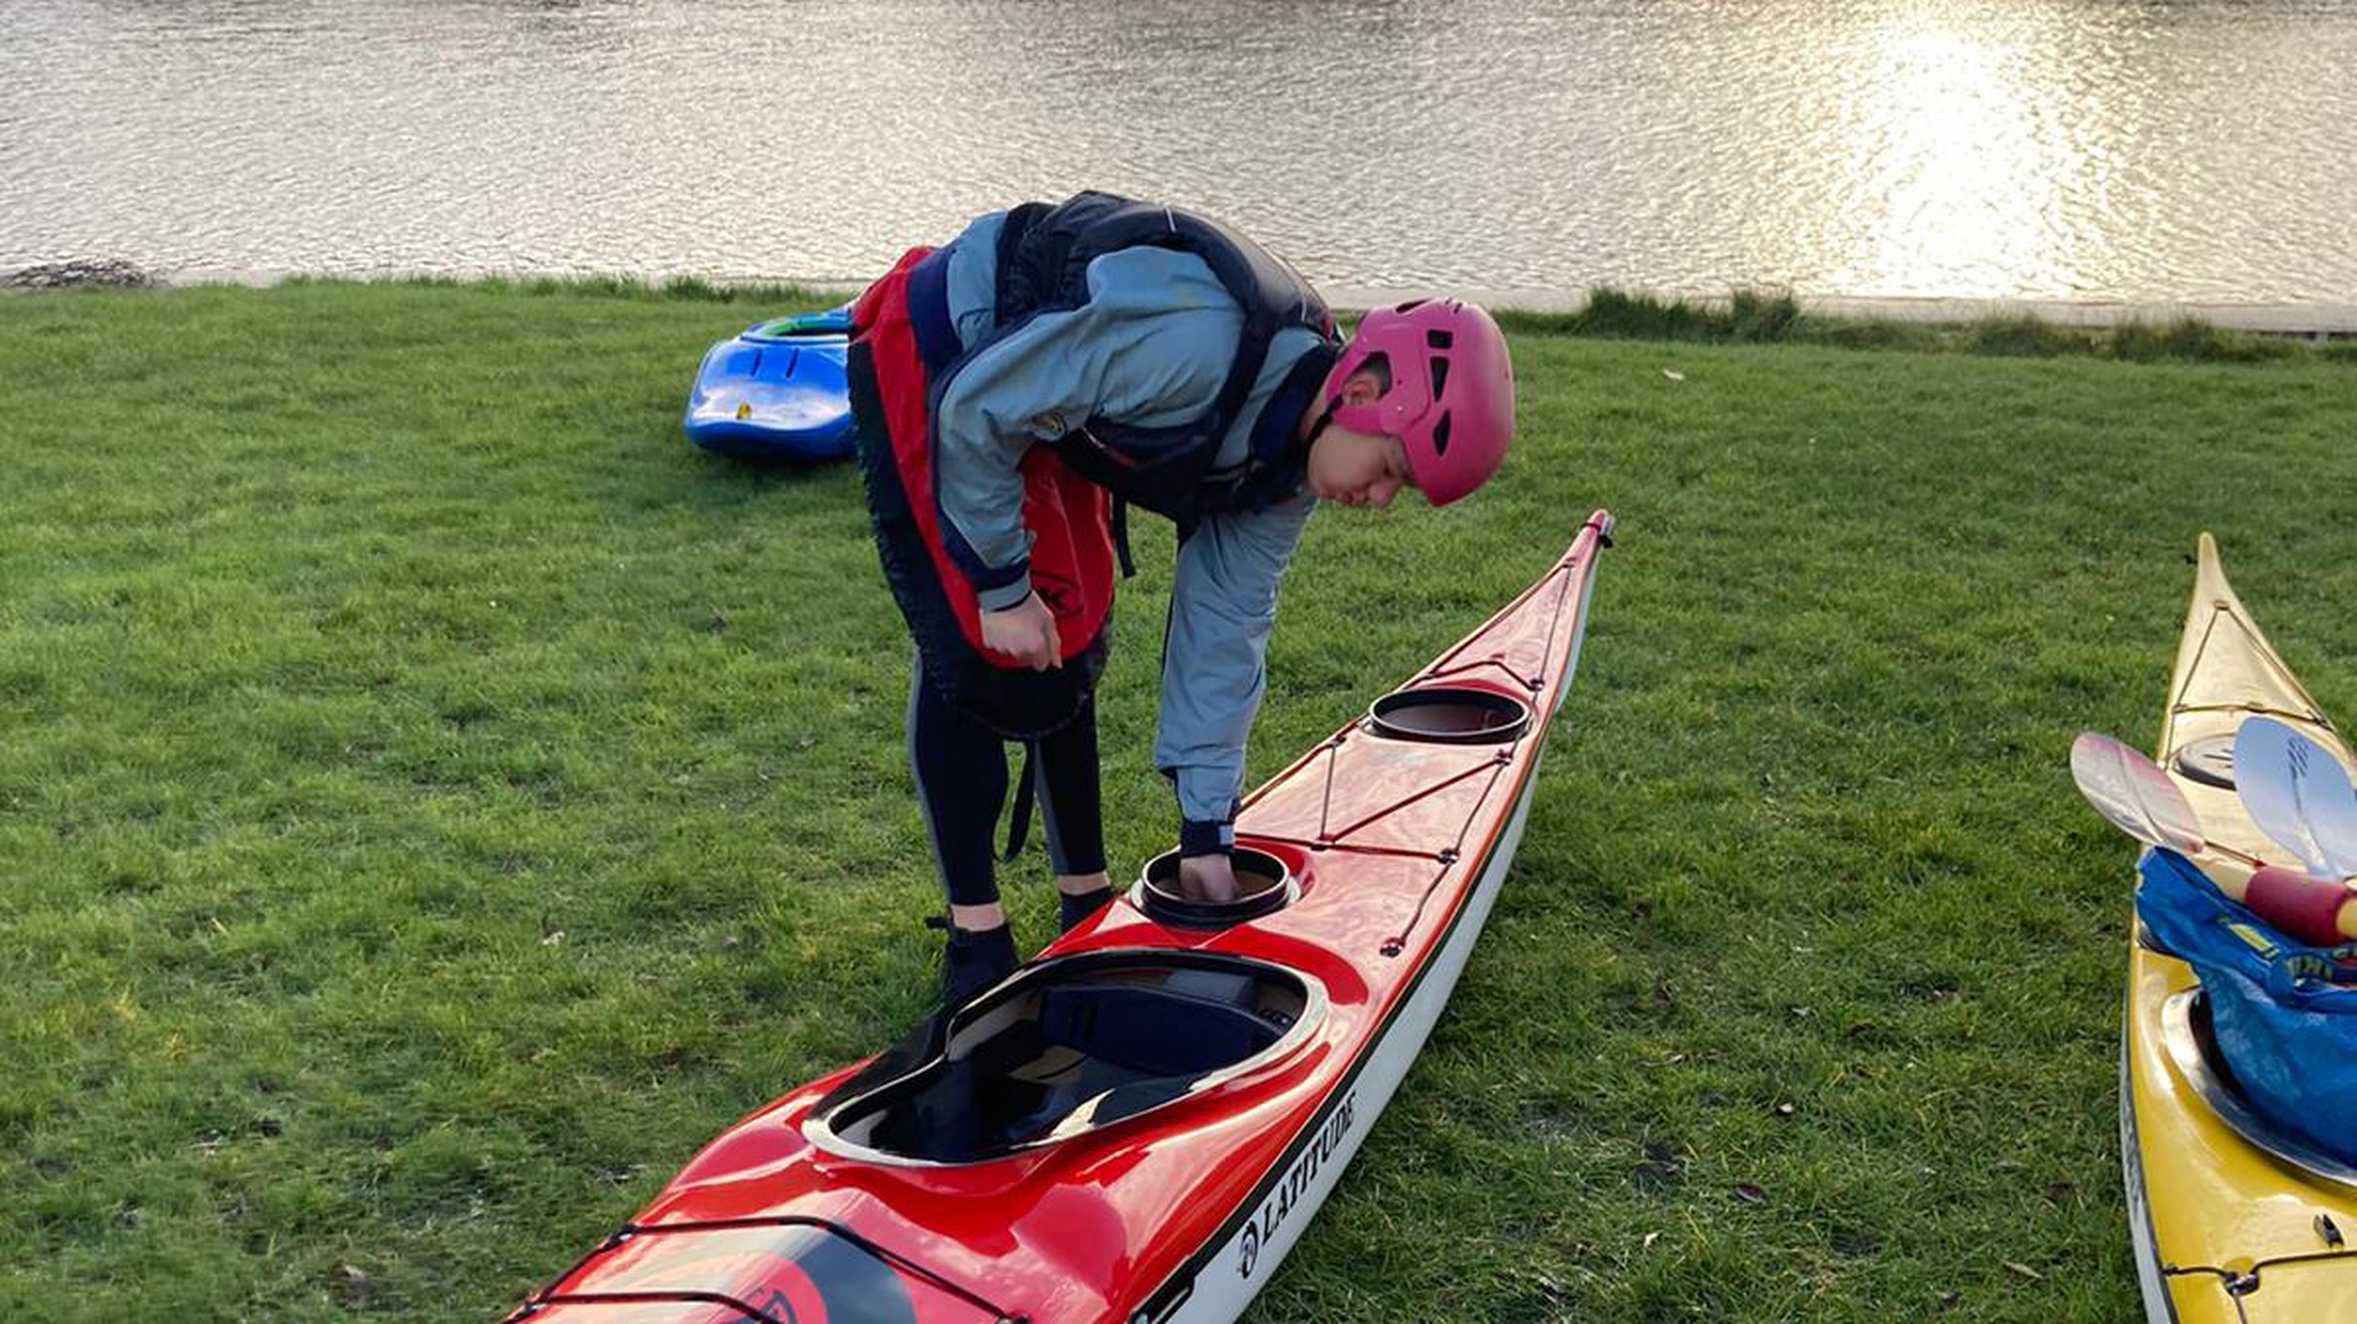 Sam getting his kayak ready to launch into the water.